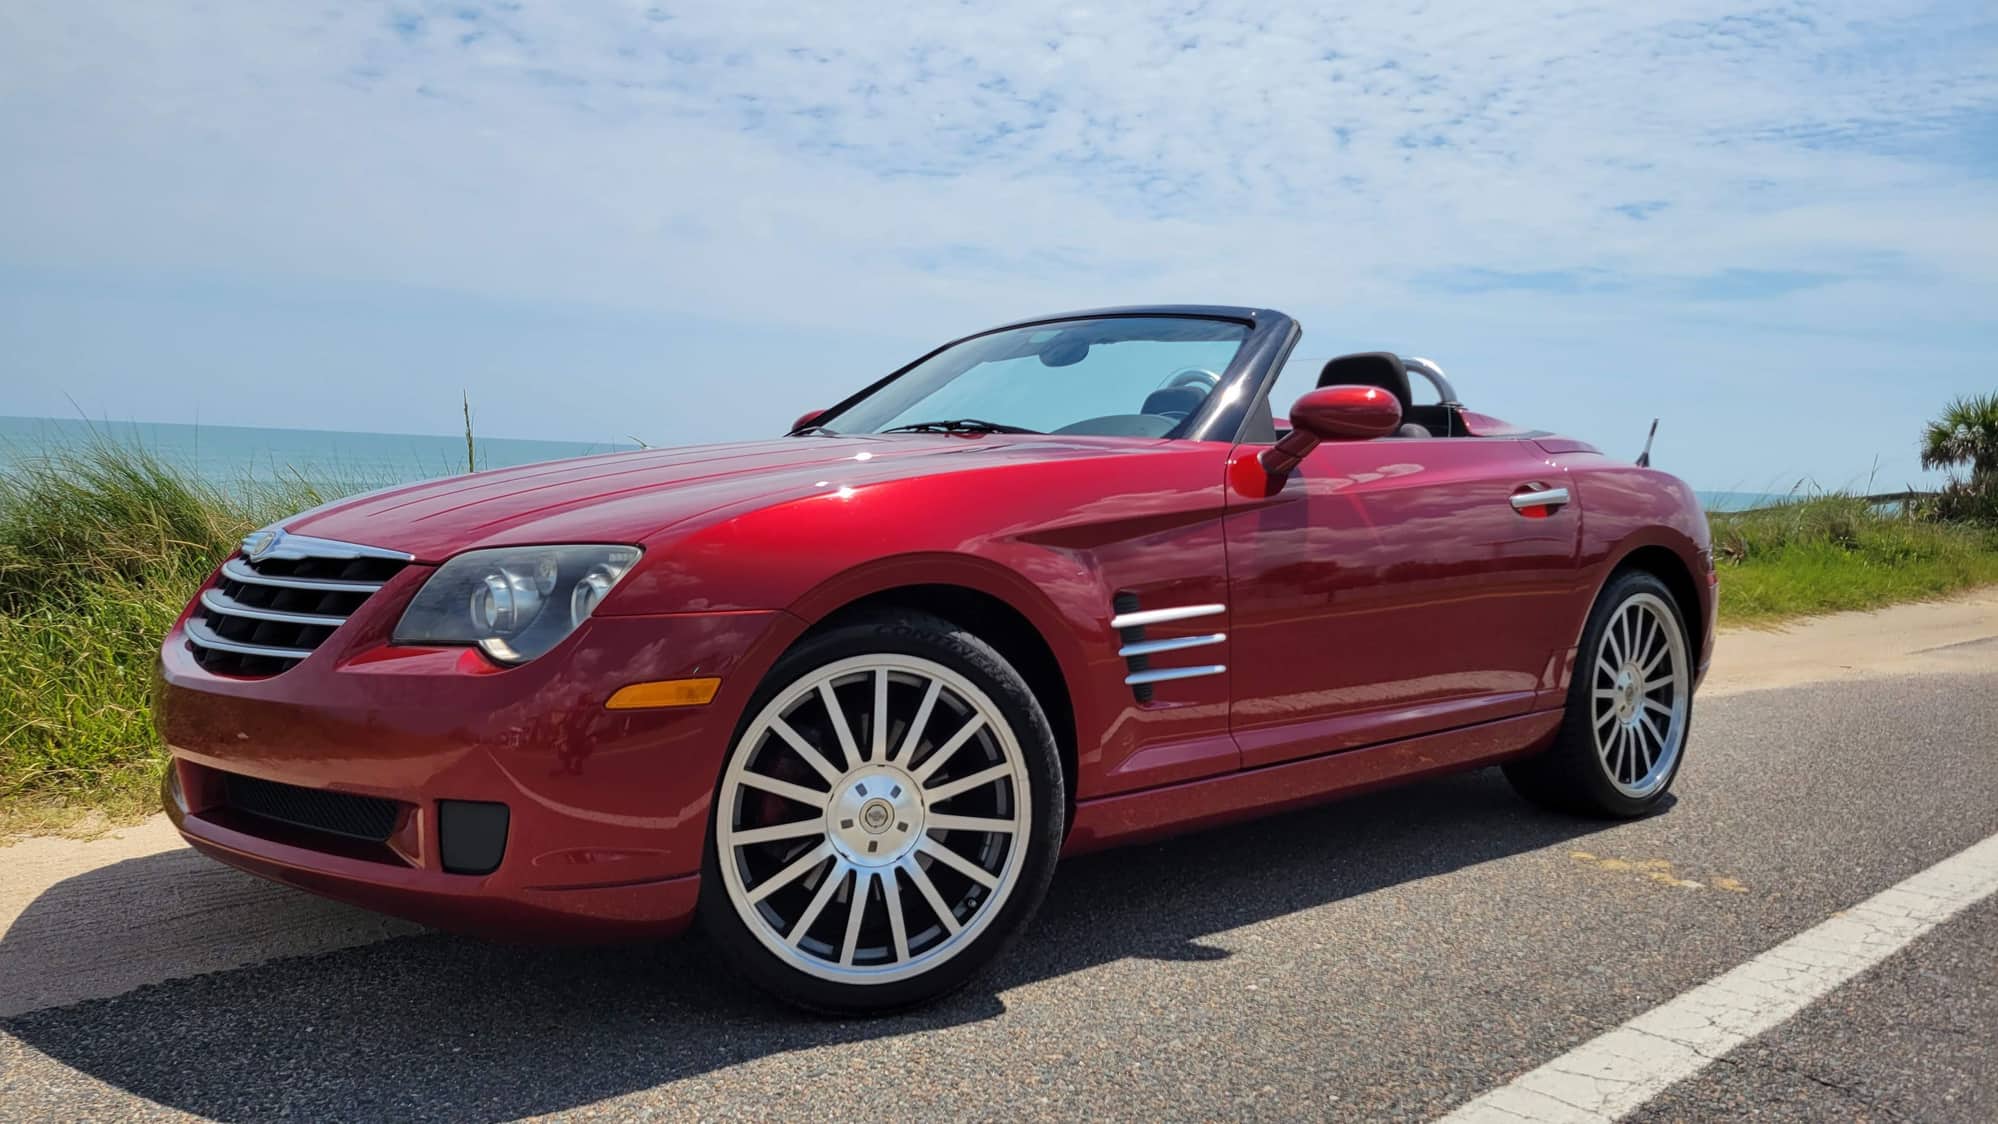 2005 Chrysler Crossfire - Great condition Garage-kept 2005 Crossfire convertible - Used - VIN 1C3AN55LX5X058691 - 59,305 Miles - 6 cyl - 2WD - Automatic - Convertible - Red - Palm Coast, FL 32164, United States